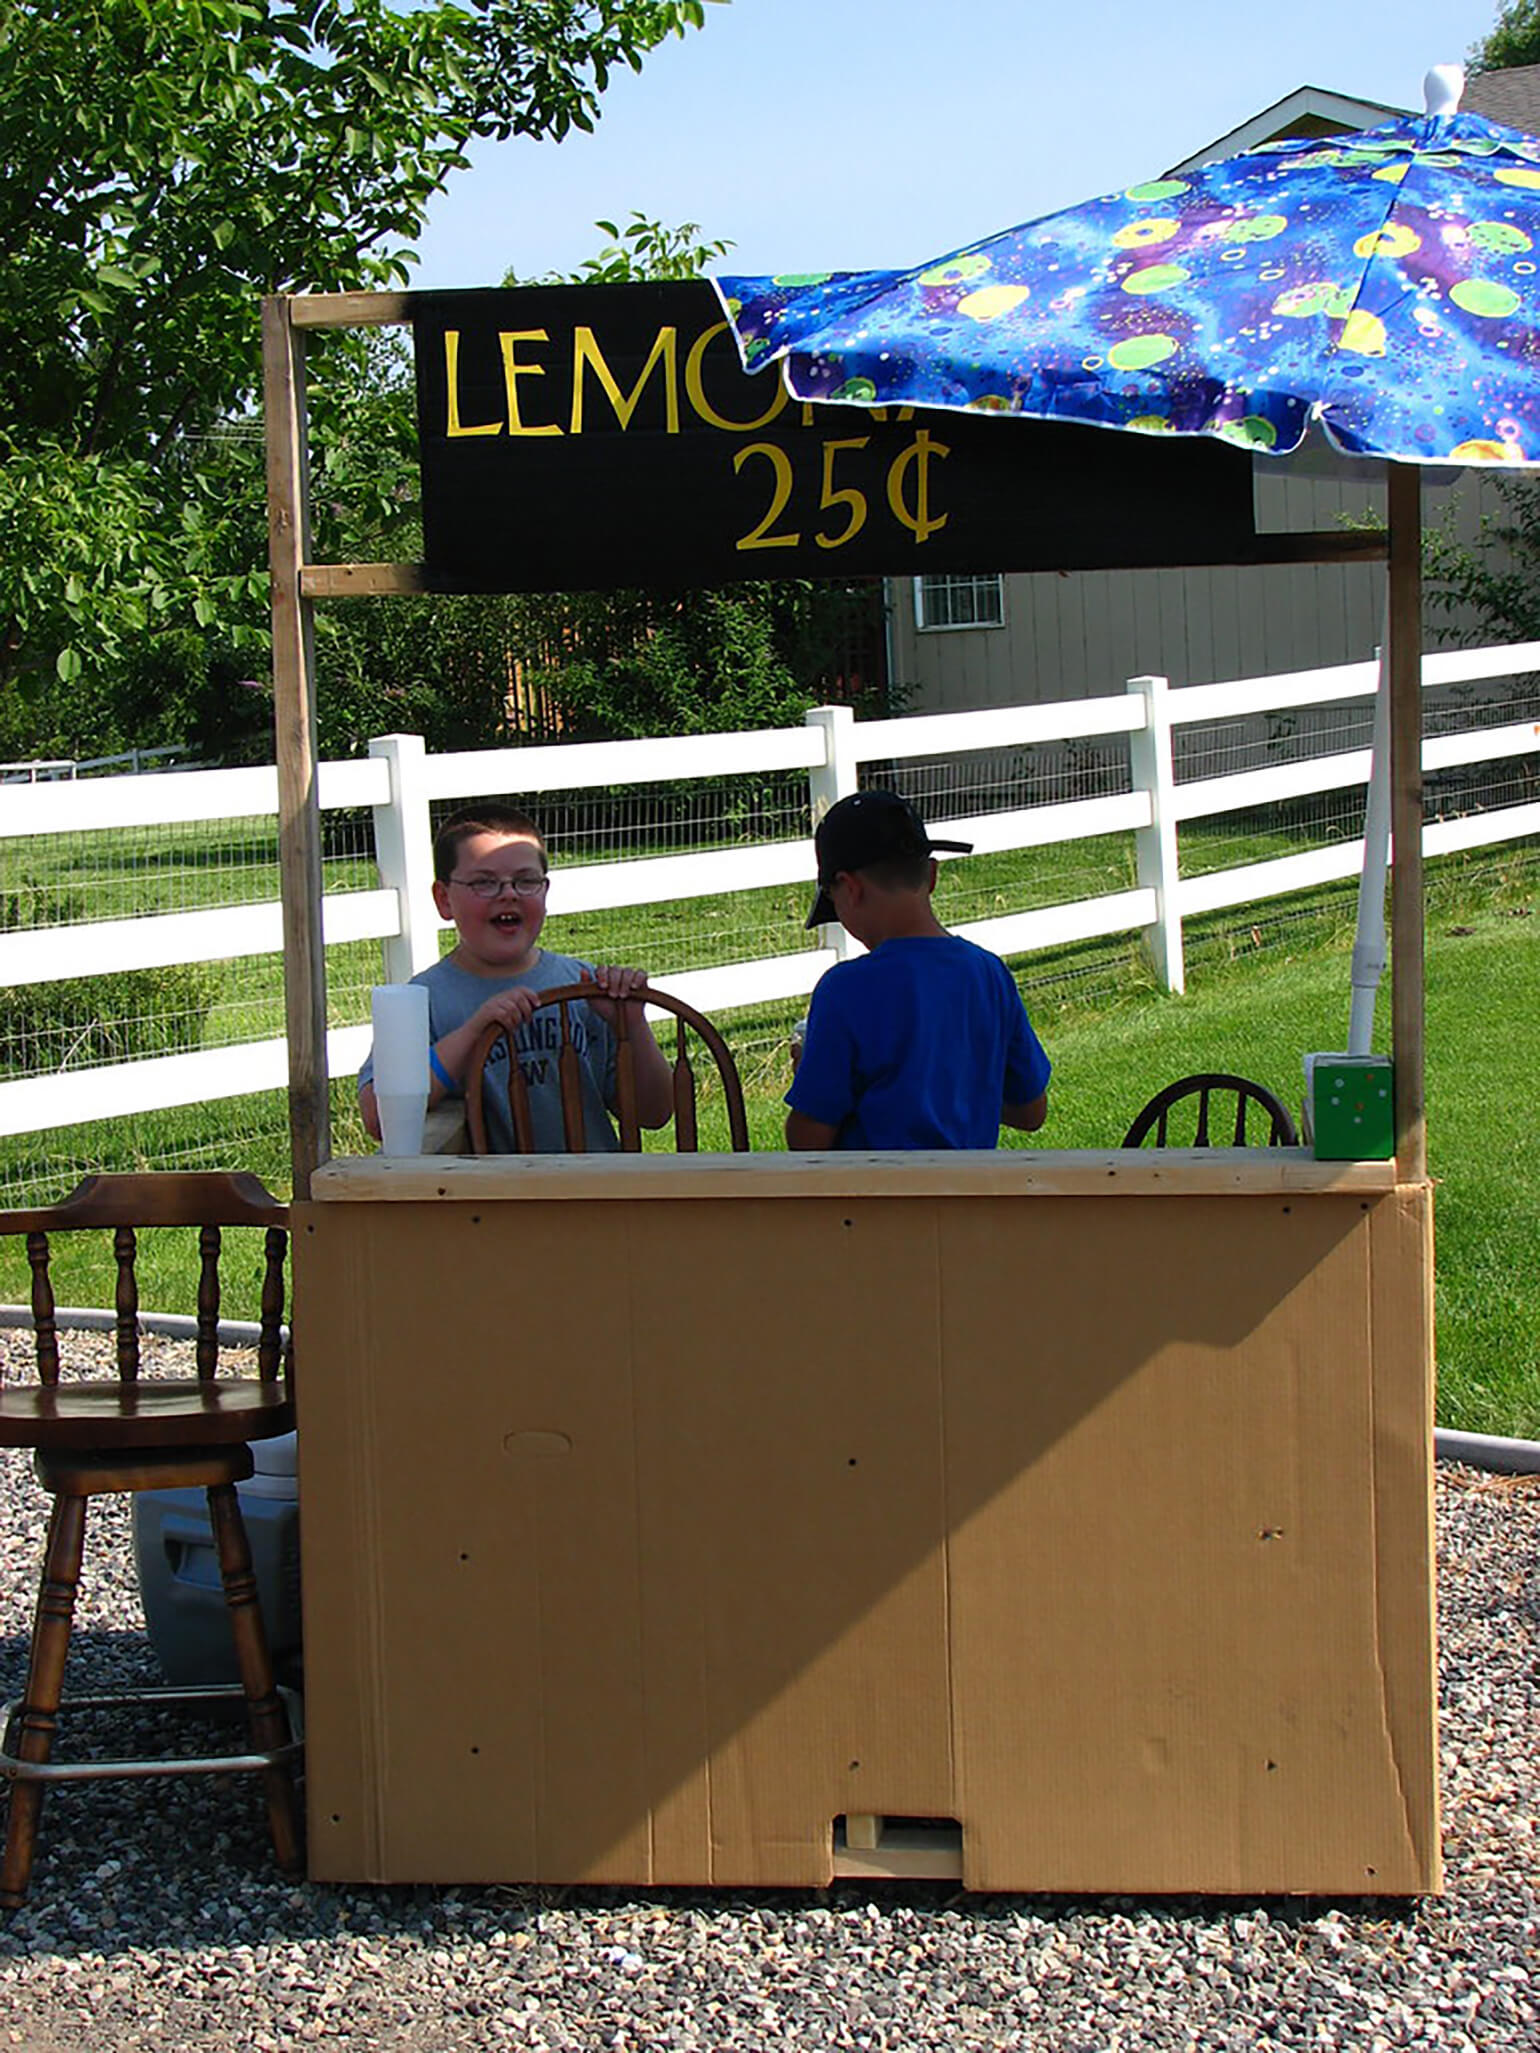 Two boys stand behind a lemonade stand. The sign above the stand says Lemonade $ .25.